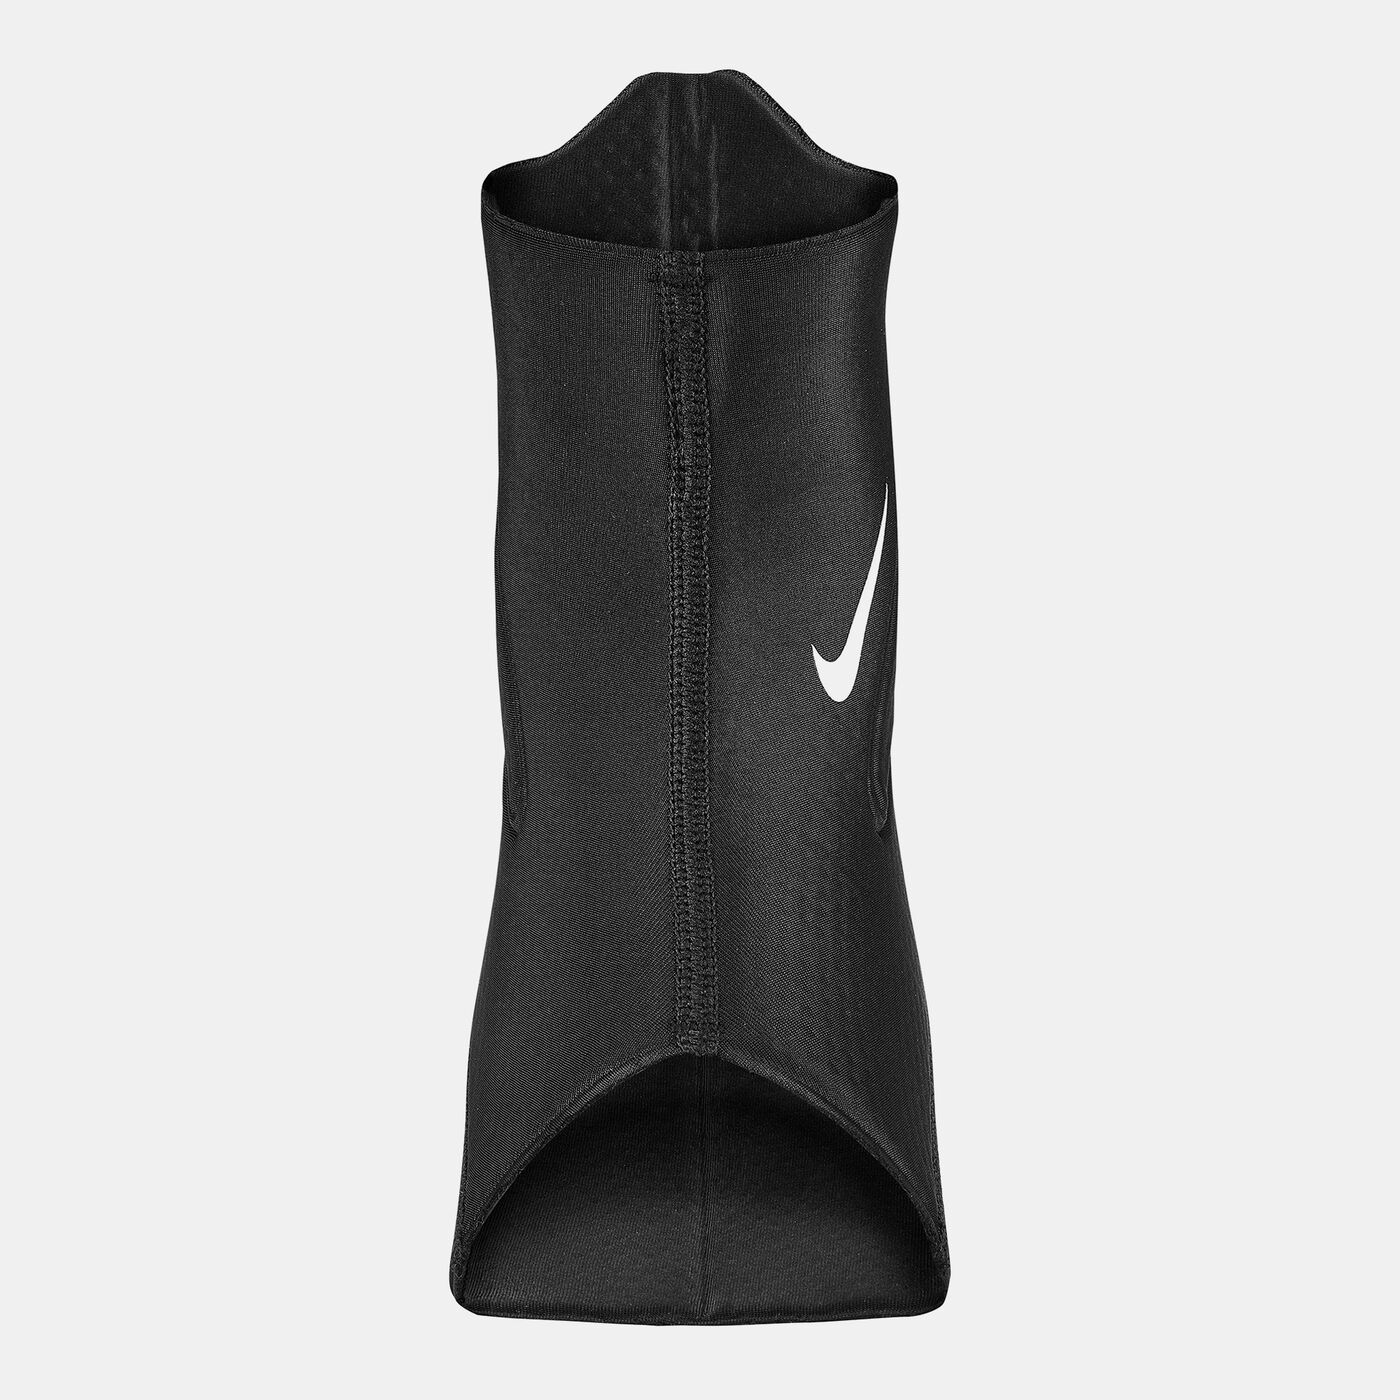 Pro 3.0 Ankle Sleeve